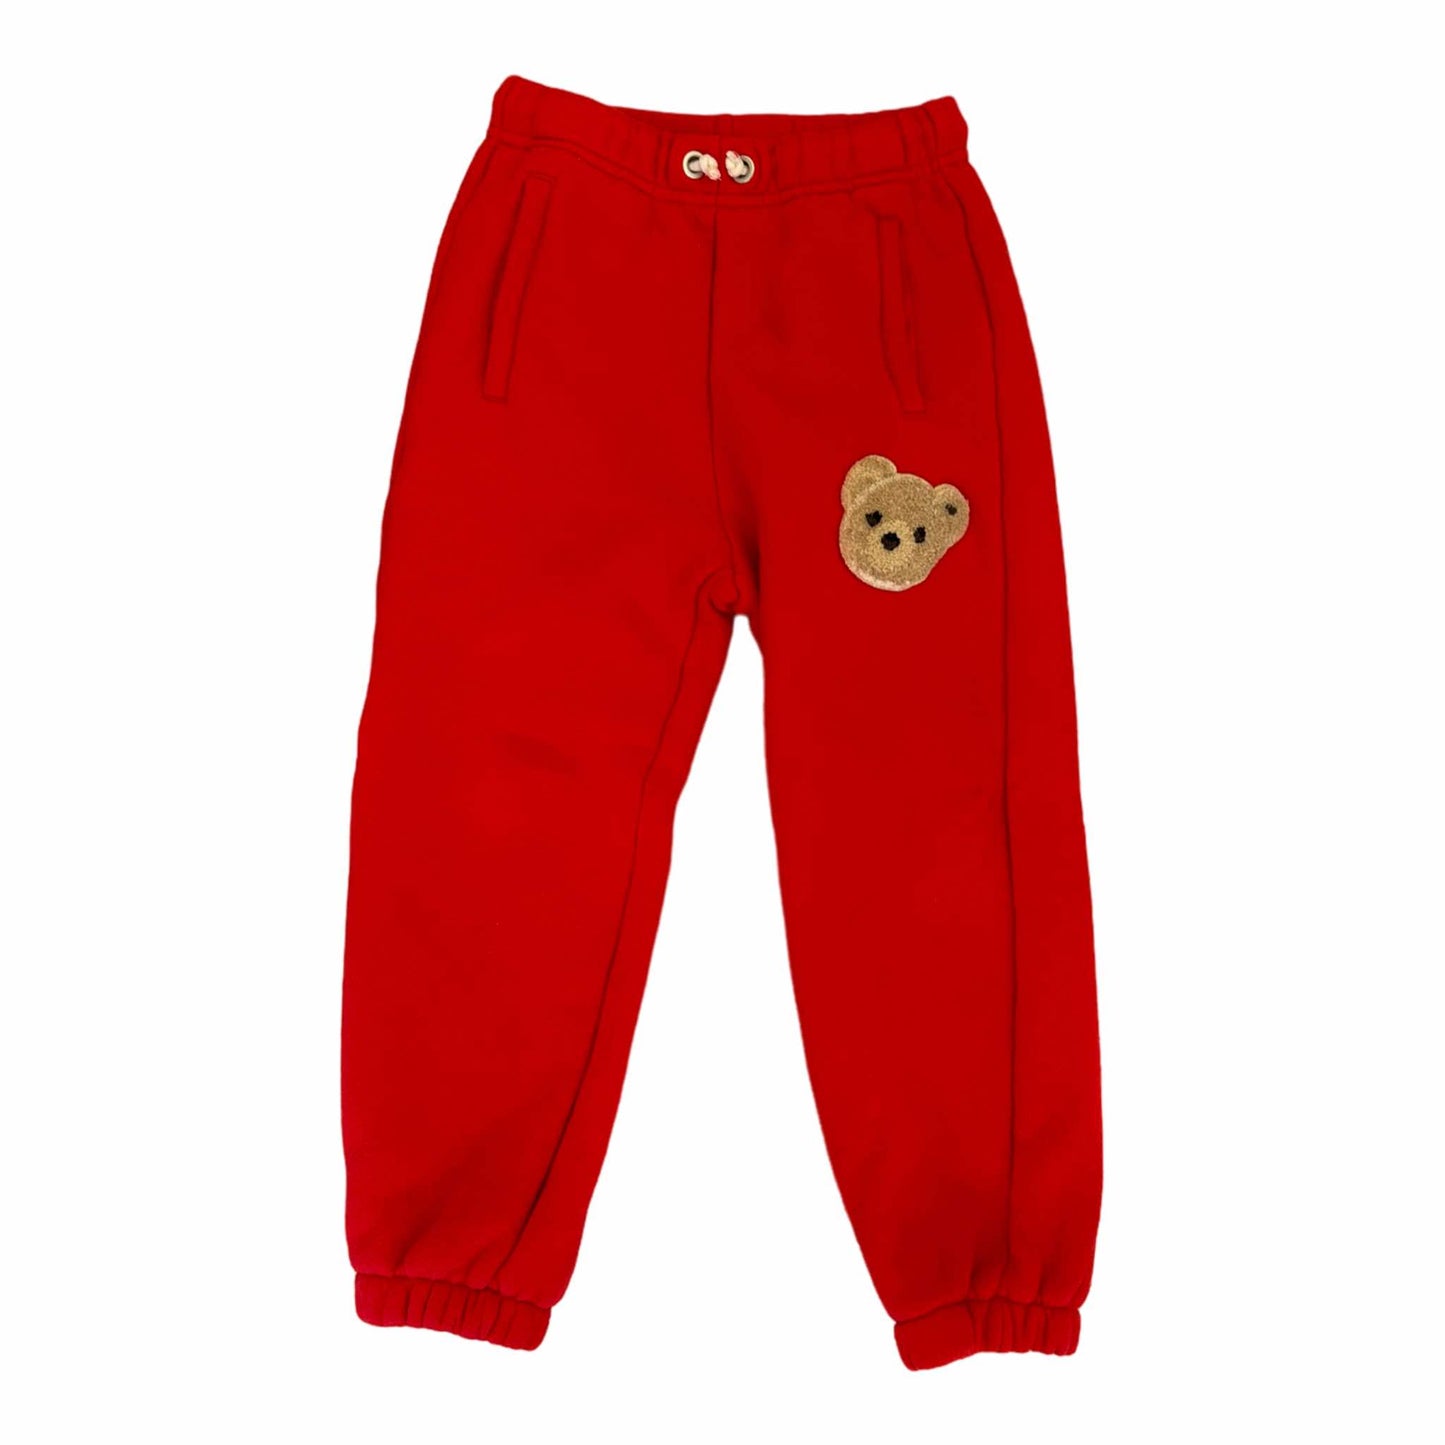 Children's Palm Angels Tracksuit - 8 Yrs